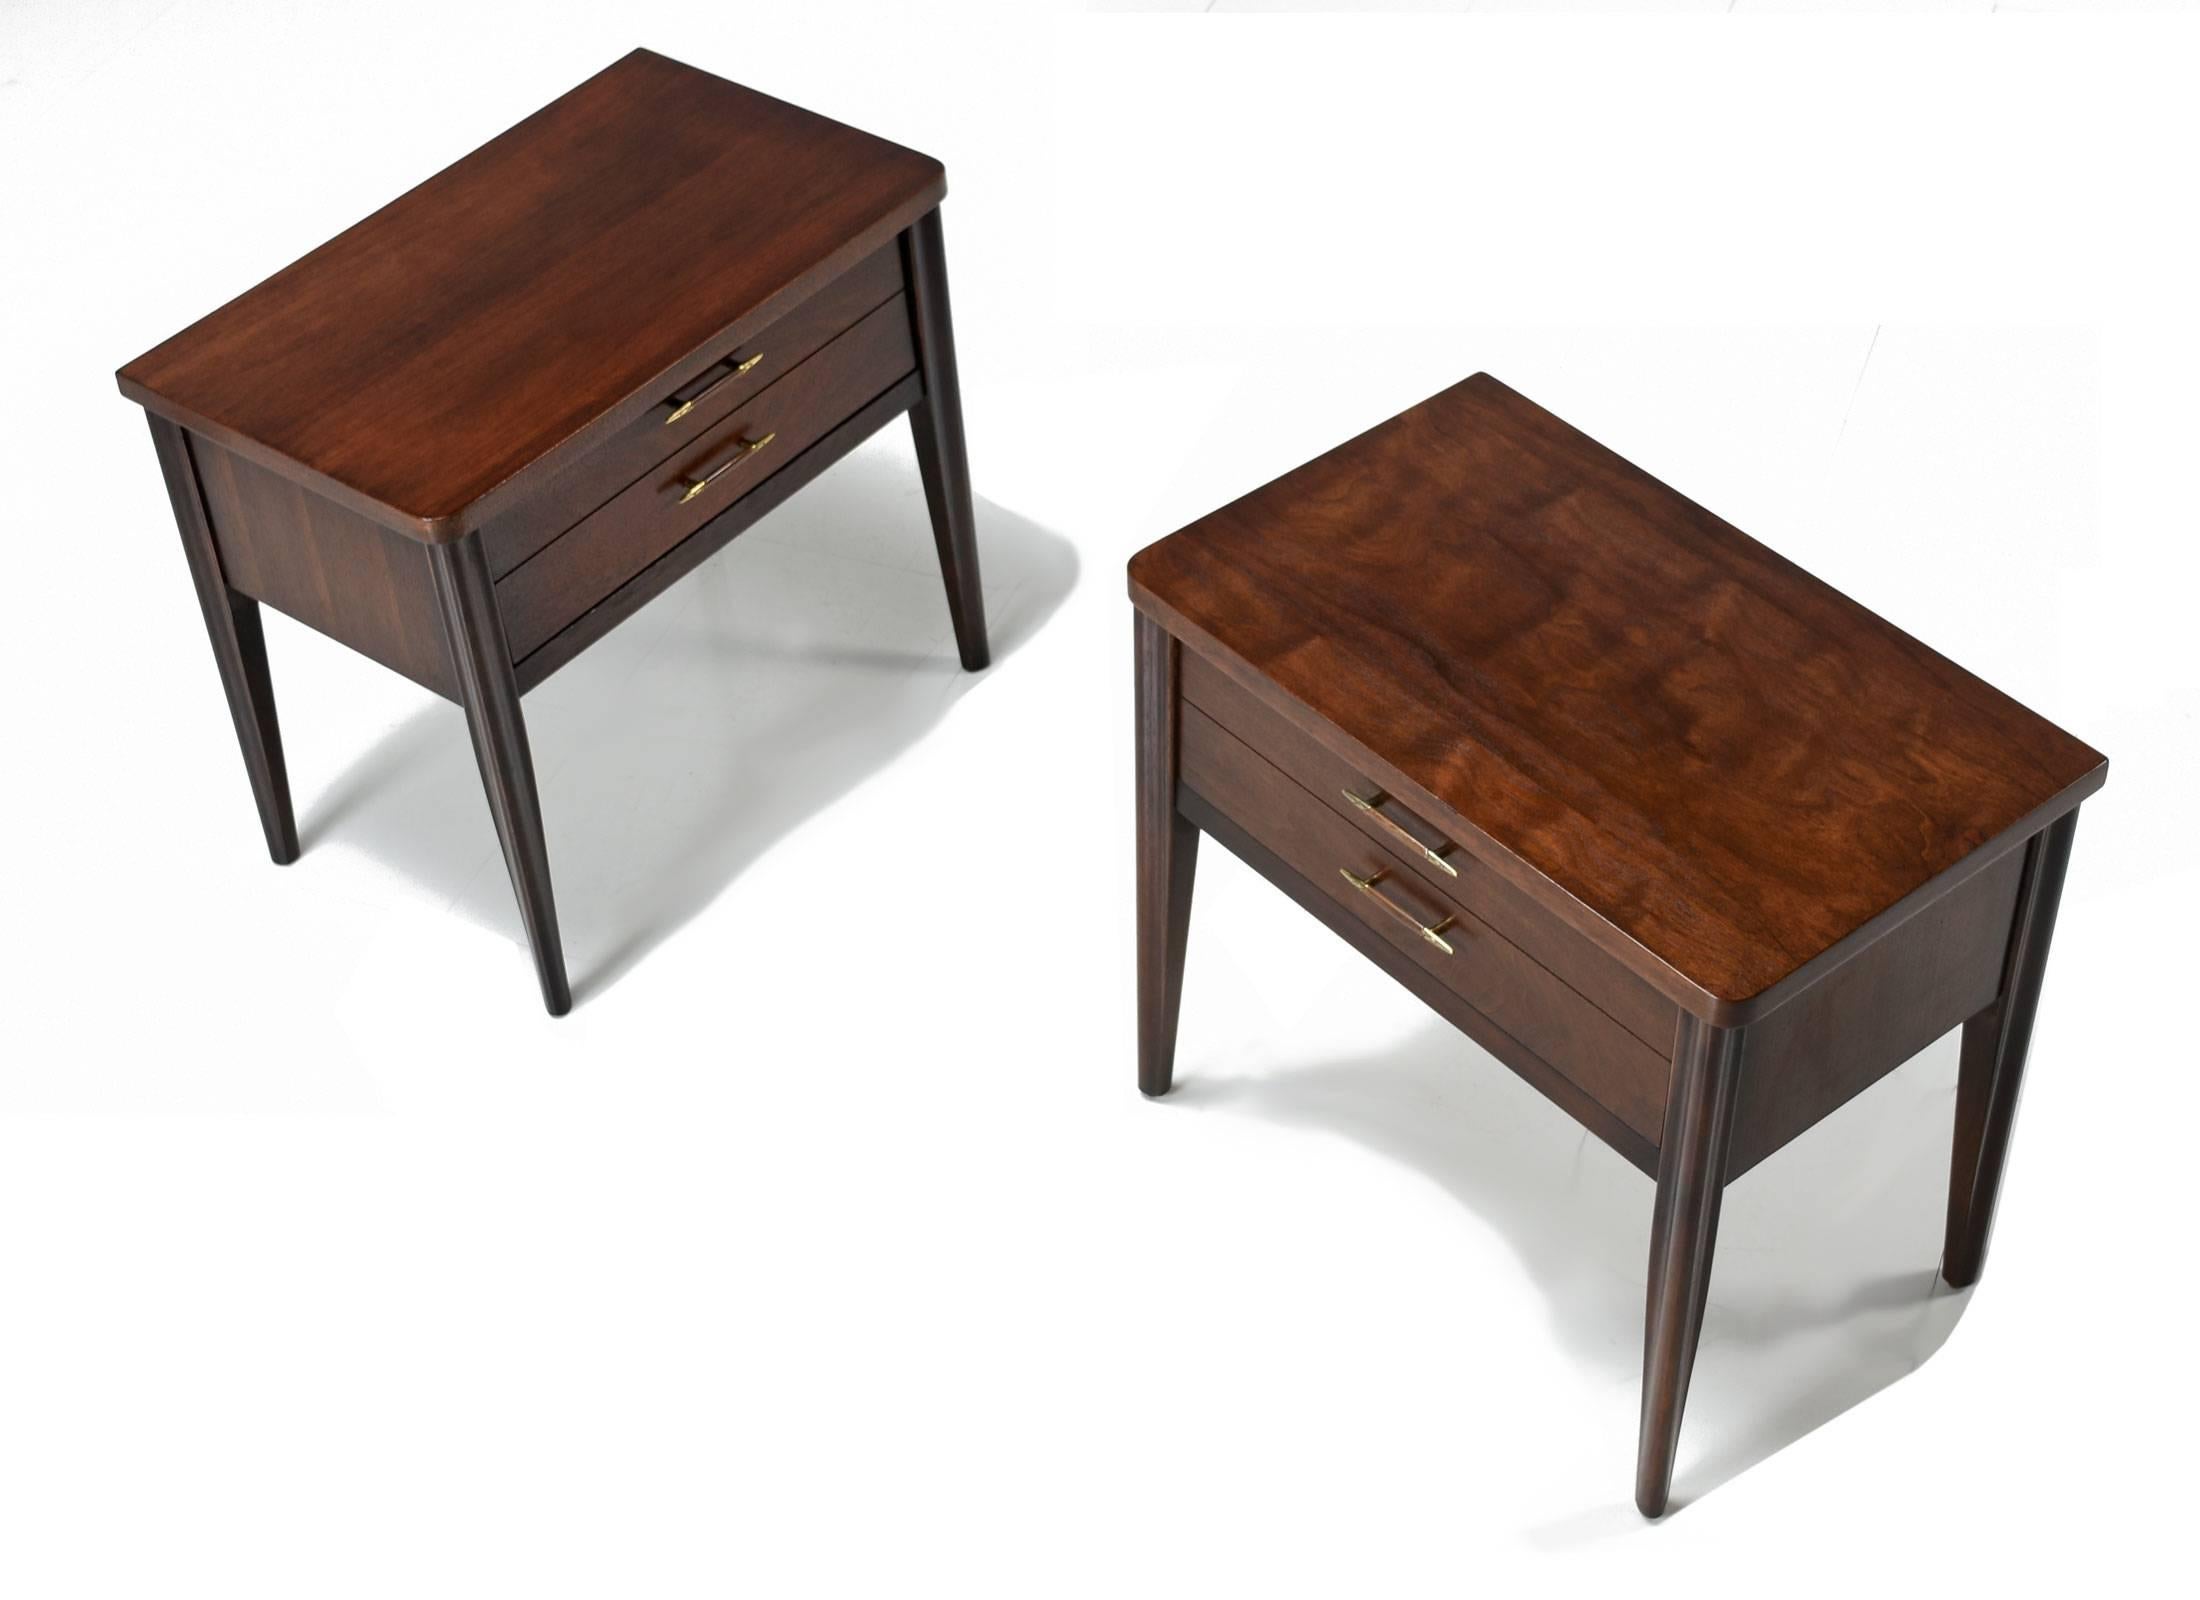 Pair of professionally refinished Broyhill saga nightstands. One of the most celebrated lines of the Mid-Century Modern Broyhill Premier series. This set of Saga nightstands features Danish inspired Minimalist styling with a touch of American flare